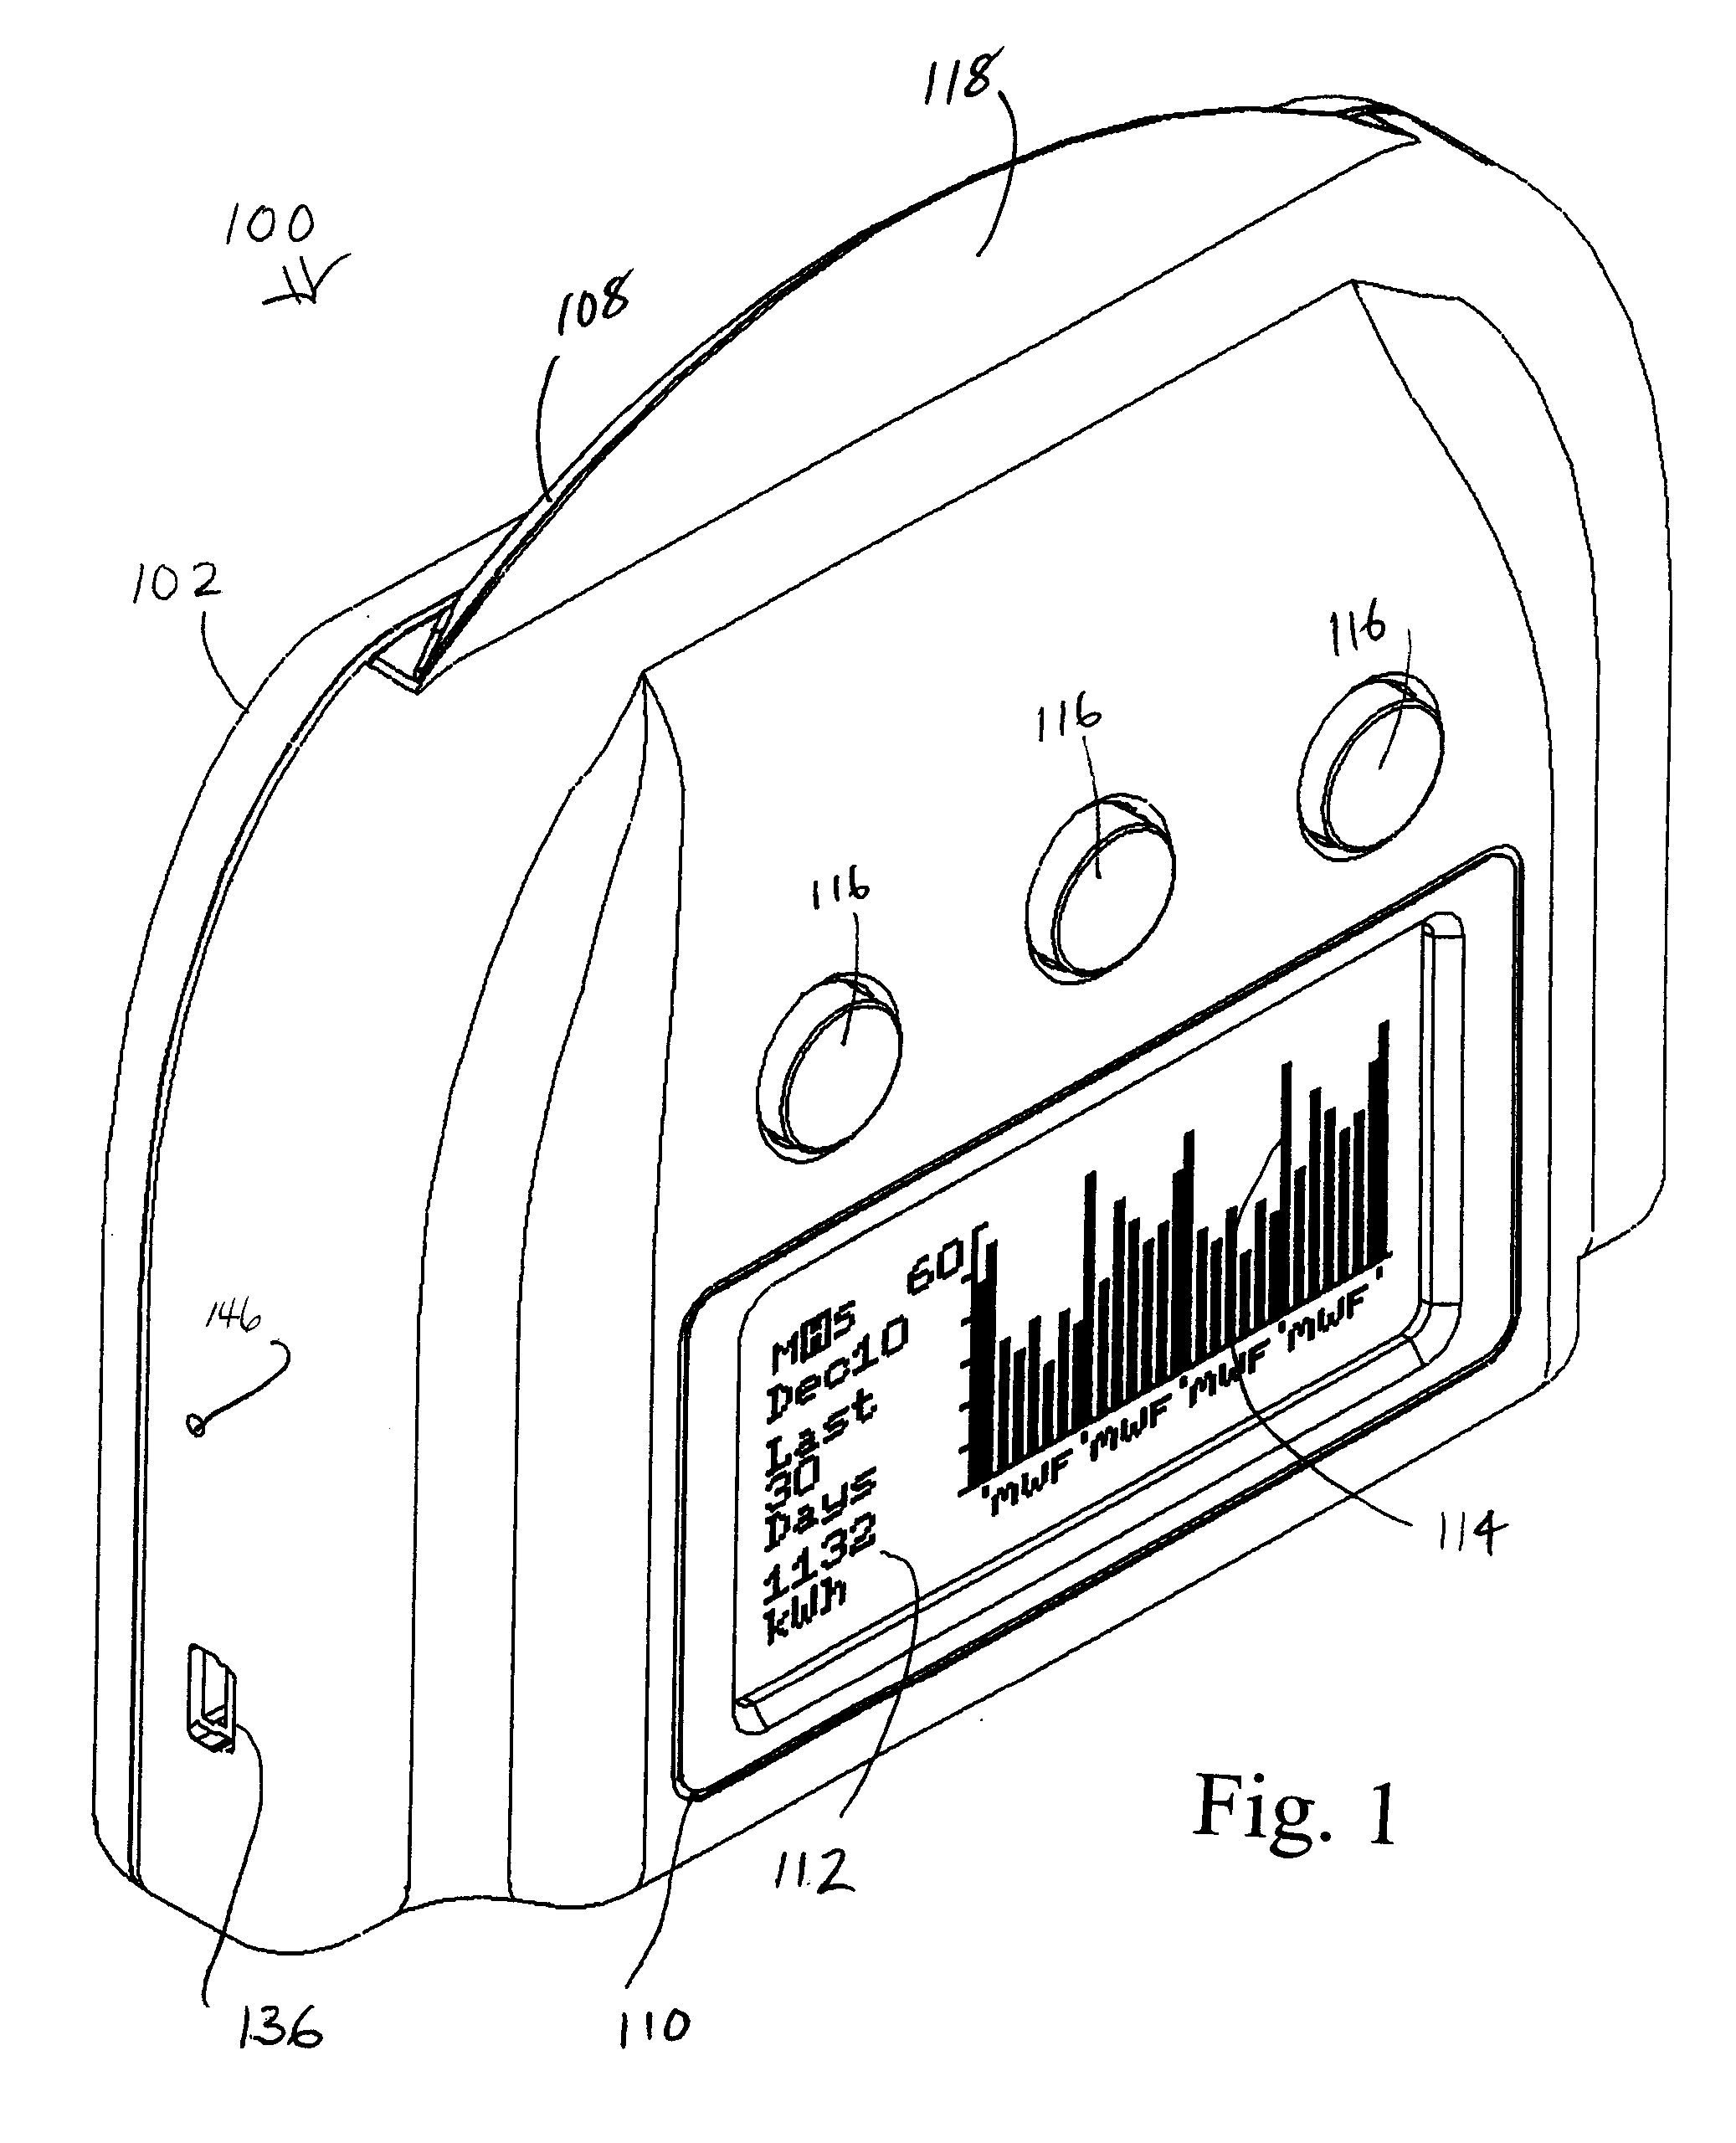 Utility monitoring device, system and method